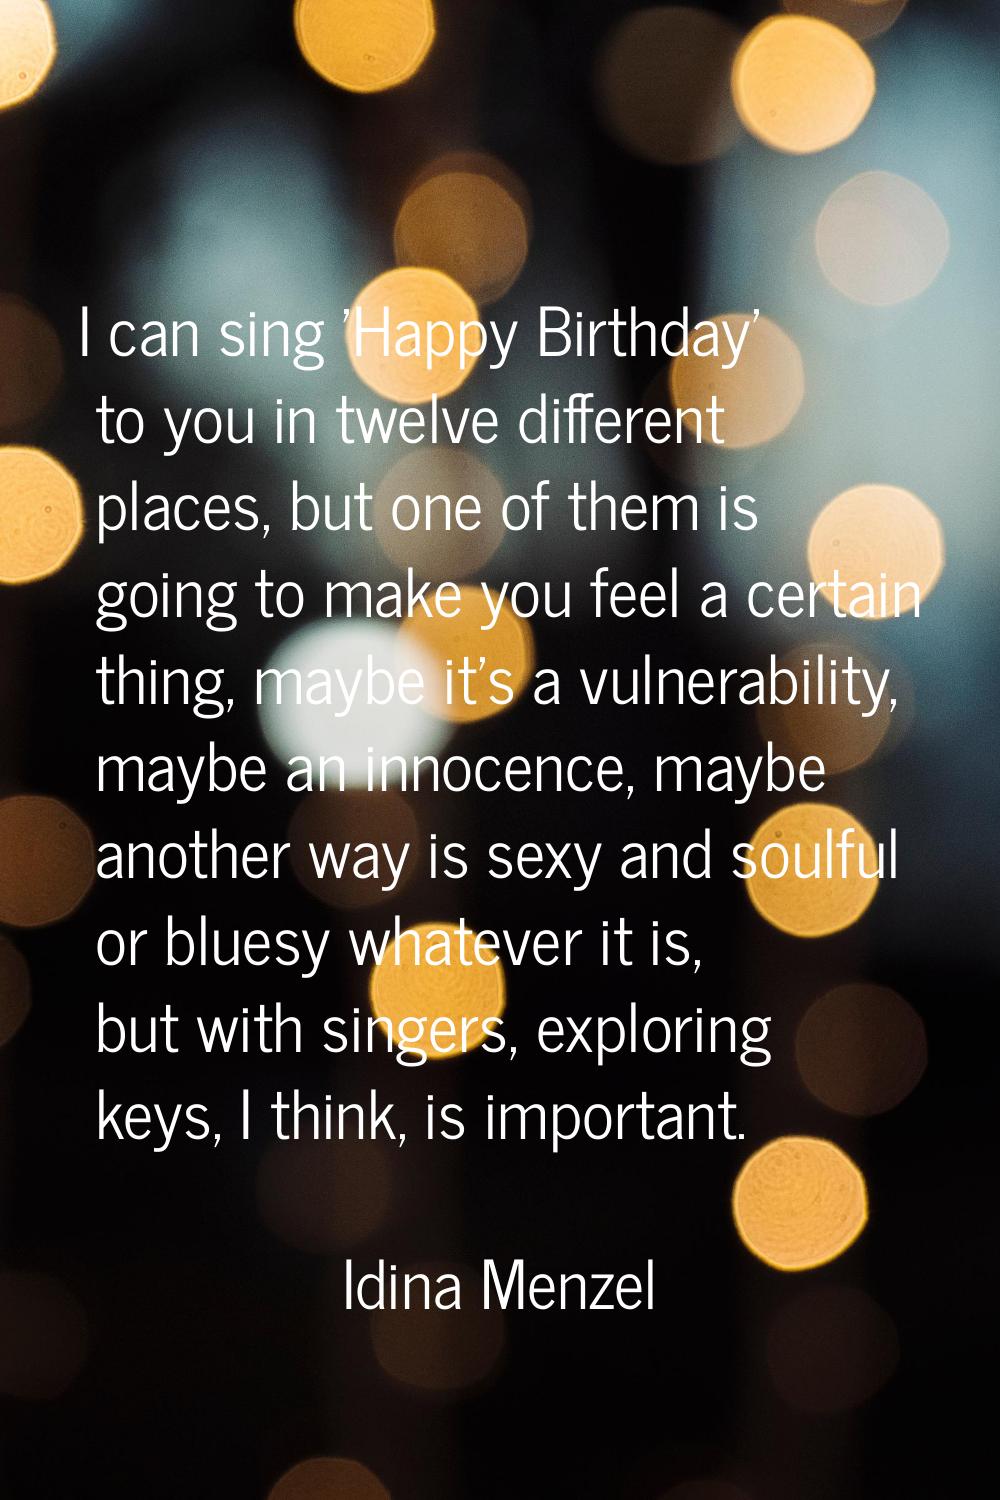 I can sing 'Happy Birthday' to you in twelve different places, but one of them is going to make you